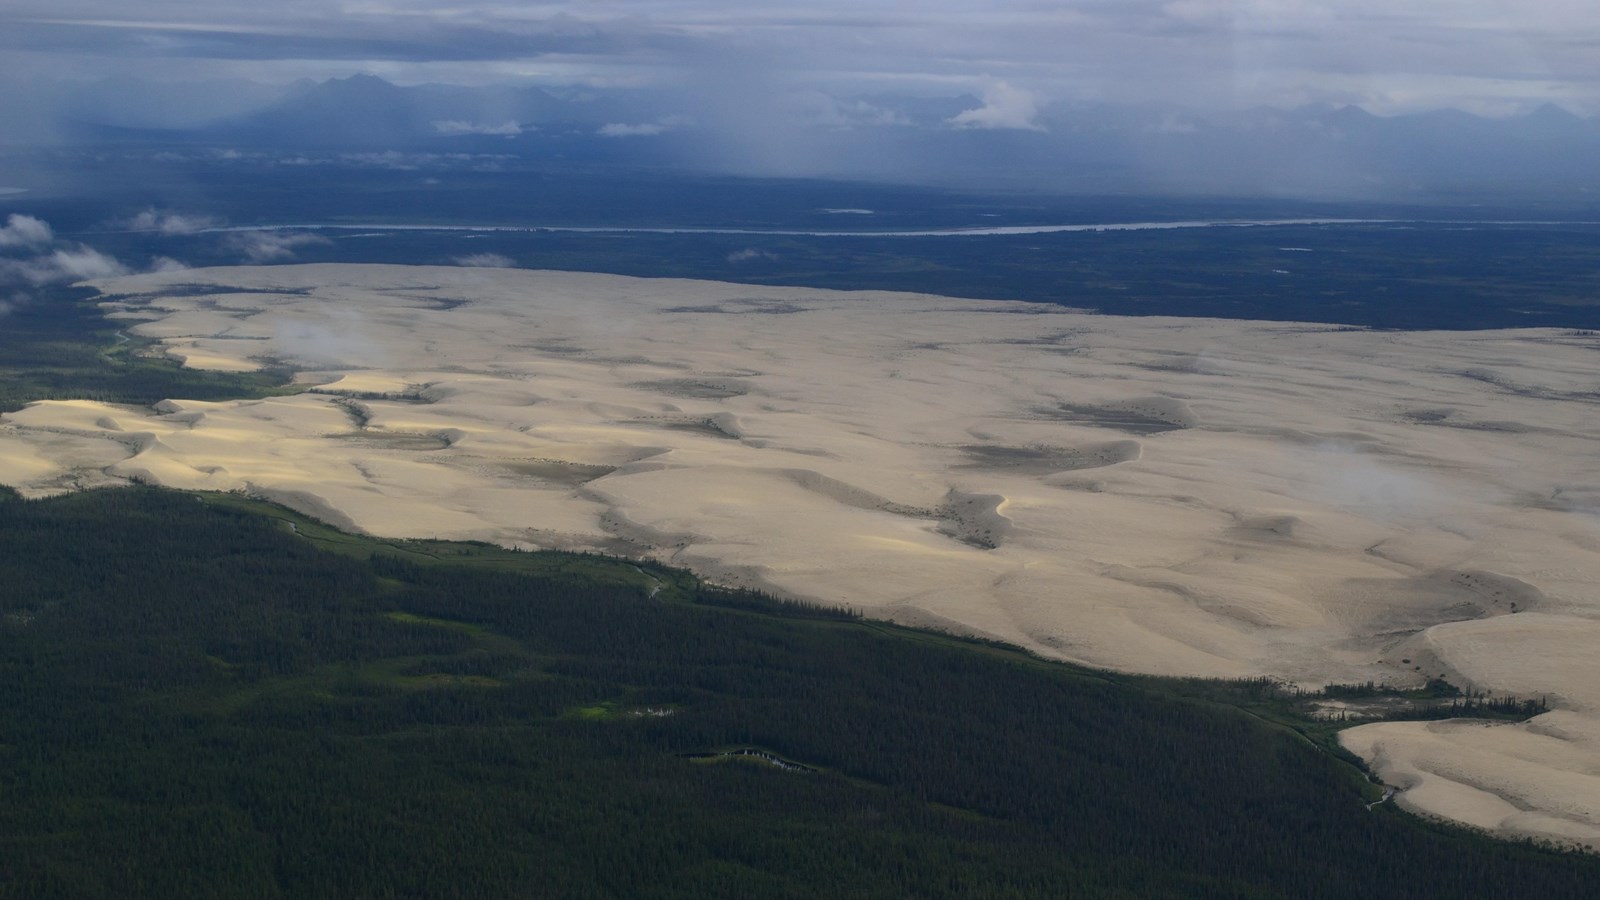 Aerial image of sand dunes surrounded by evergreen trees